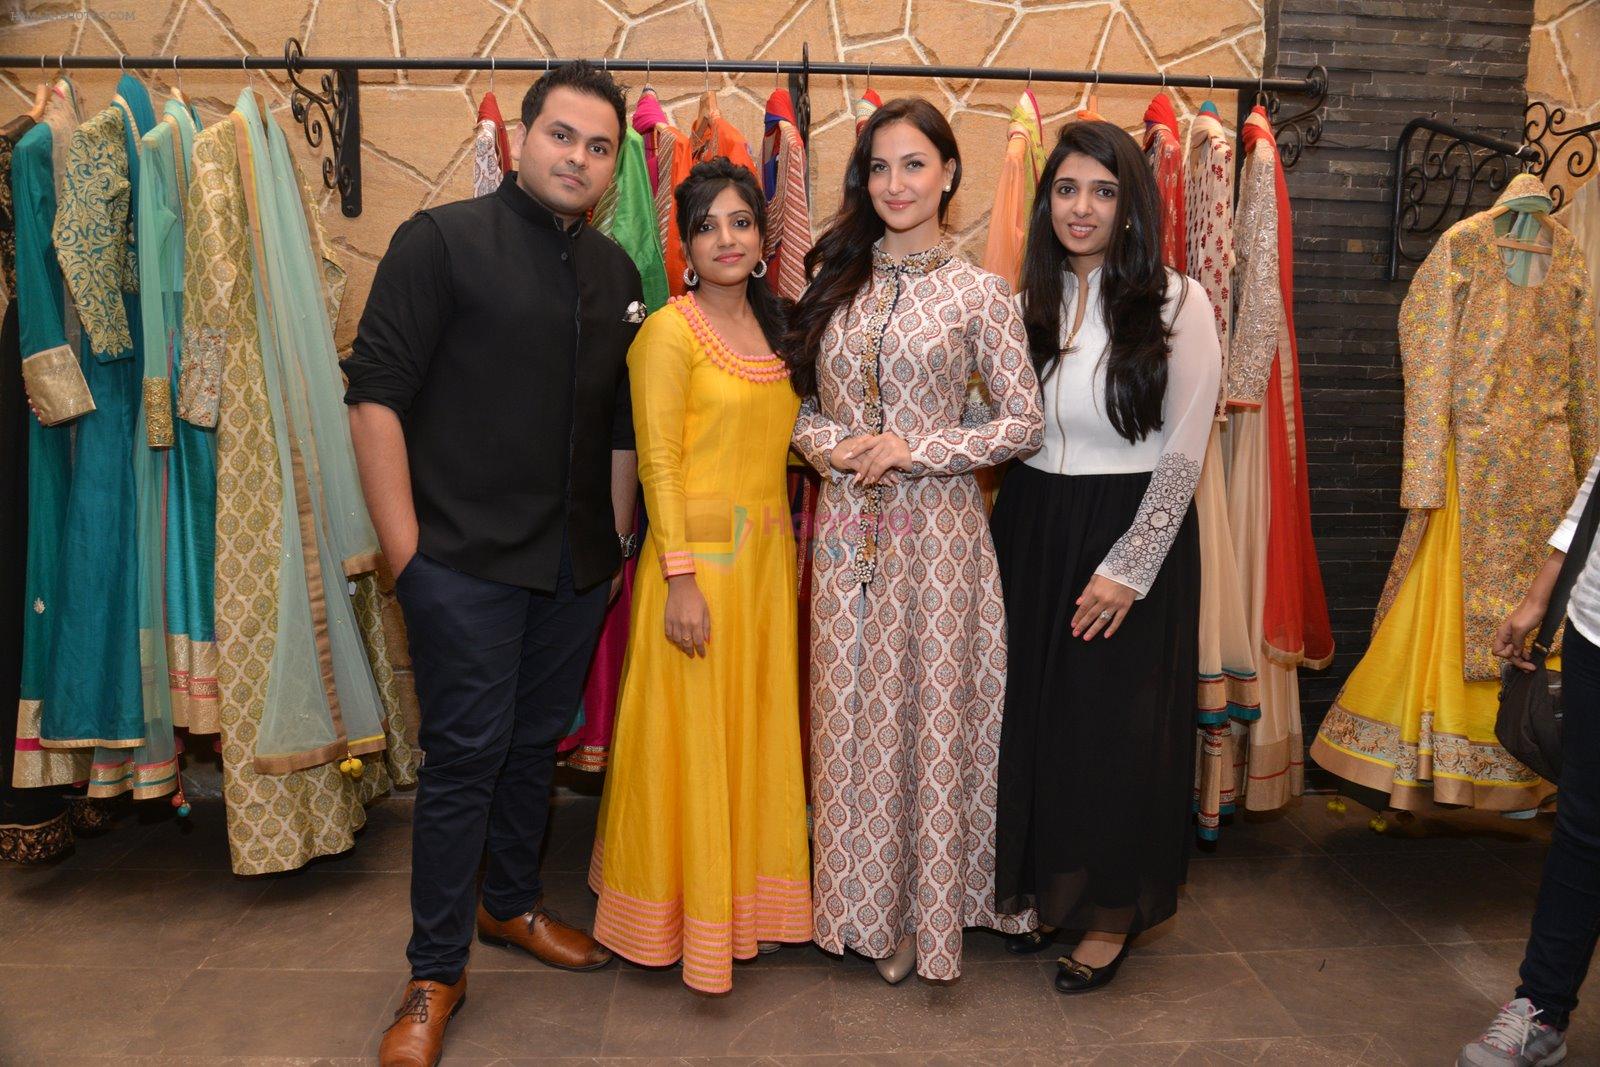 Elli Avram at the festive collection launch at the Hue store on 20th Jan 2015